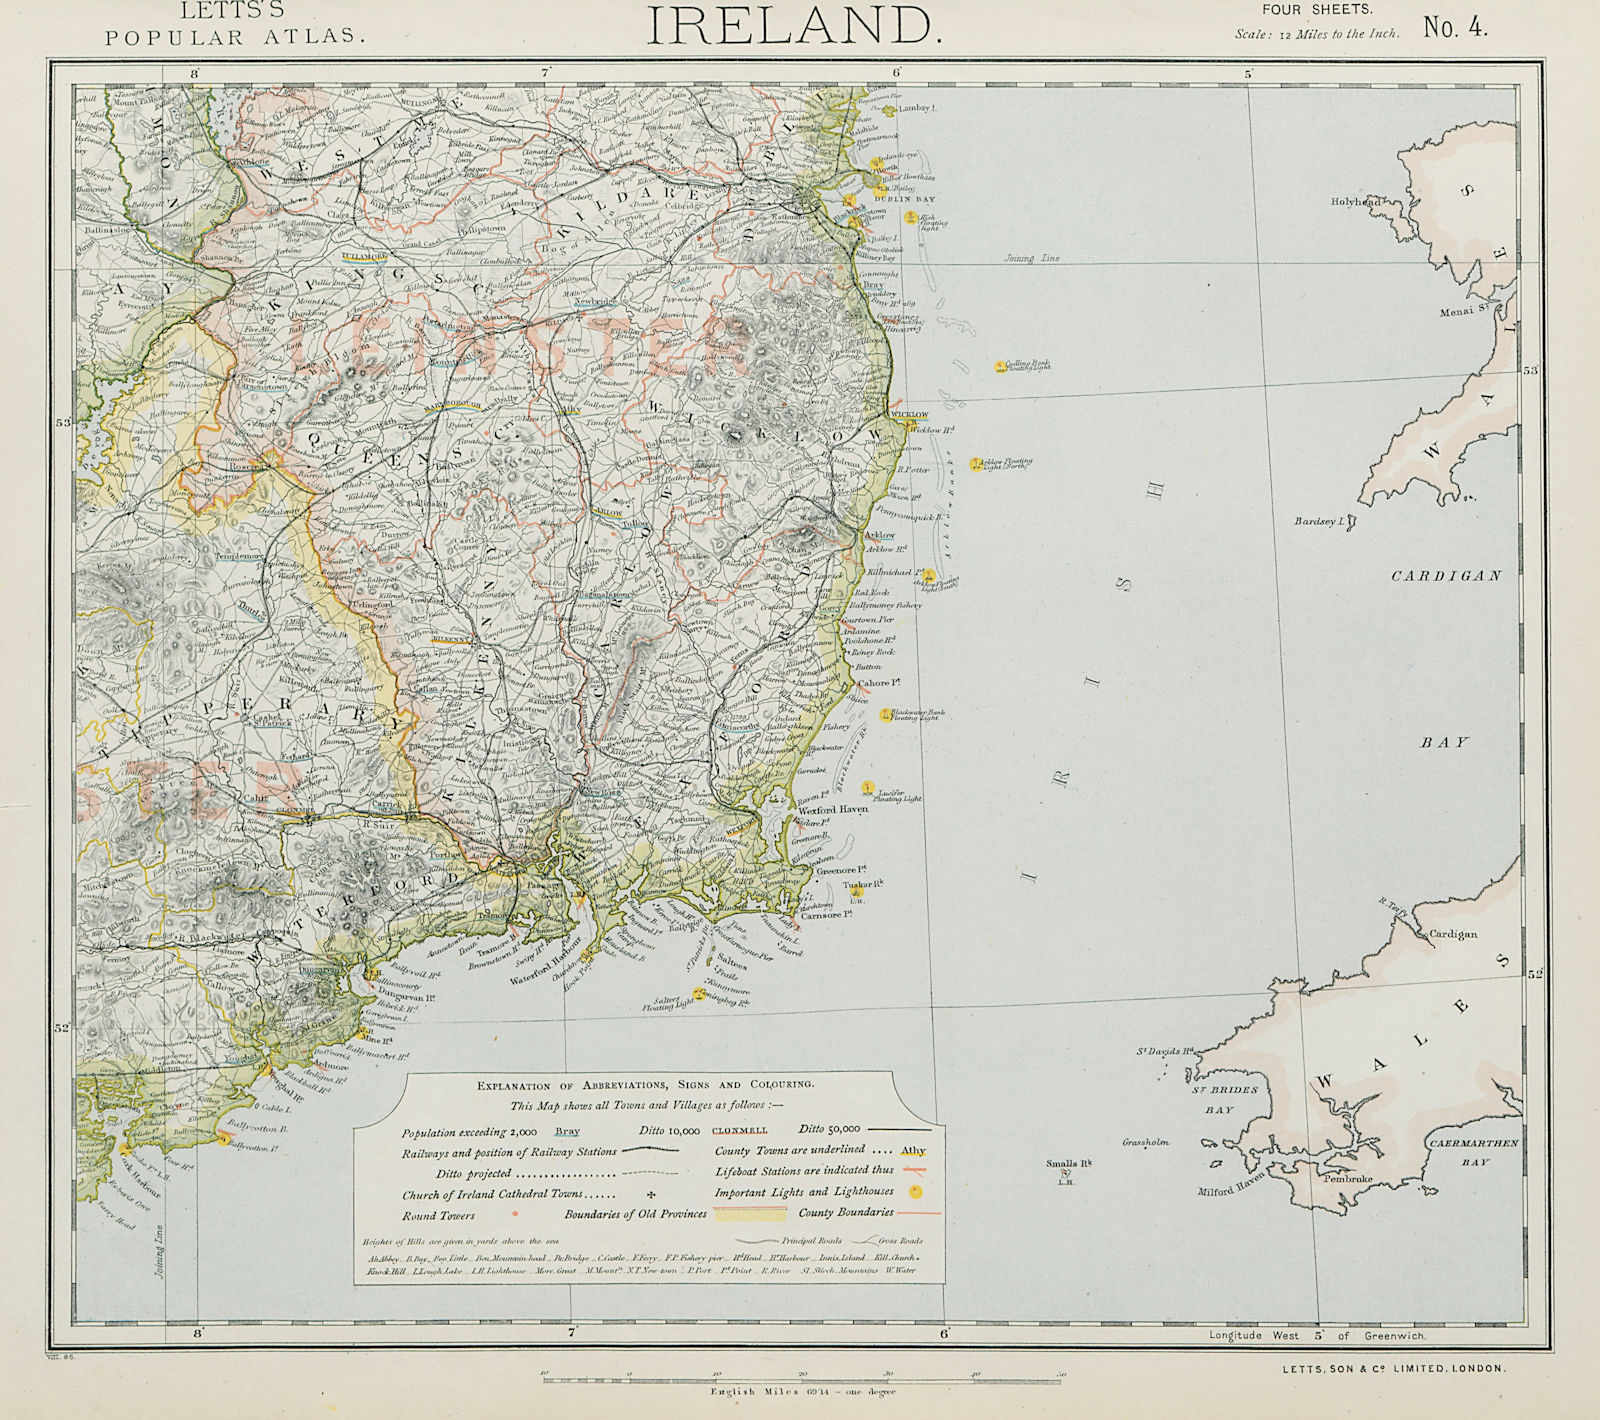 Associate Product SE IRELAND LEINSTER. Lighthouses Lifeboat stations Round towers. LETTS 1884 map